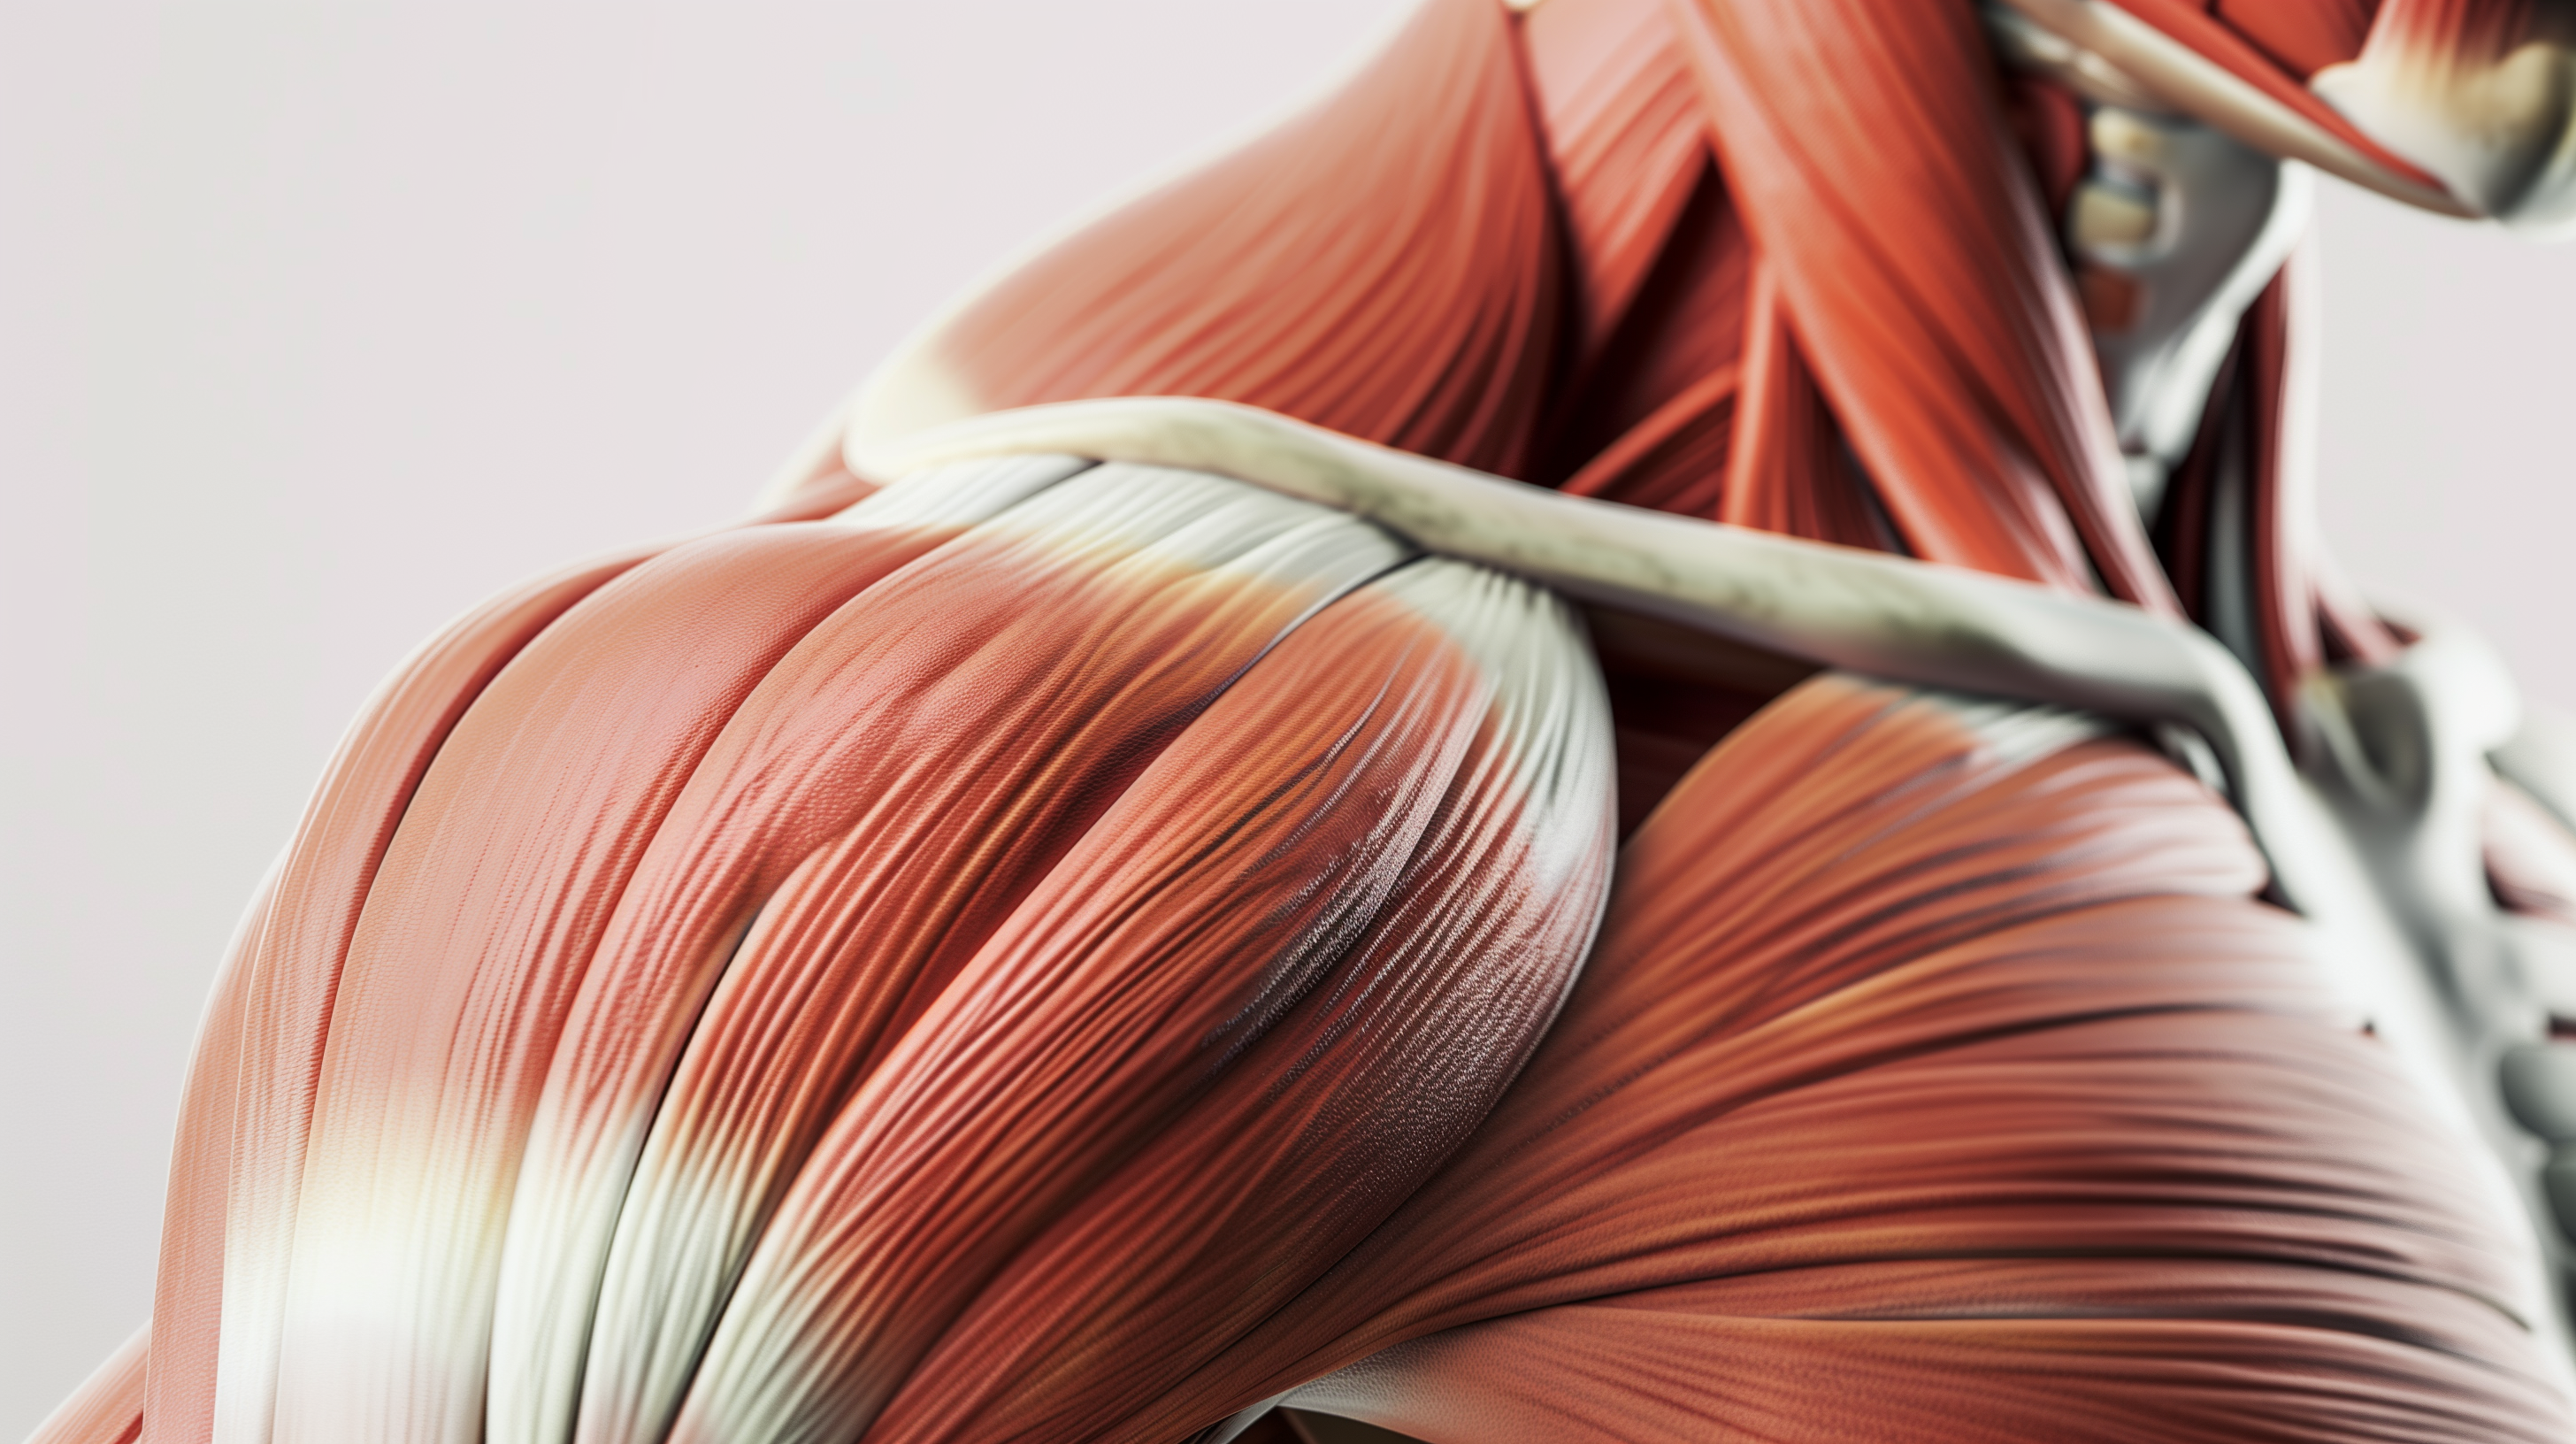 a realistic 3D render of shoulder muscles